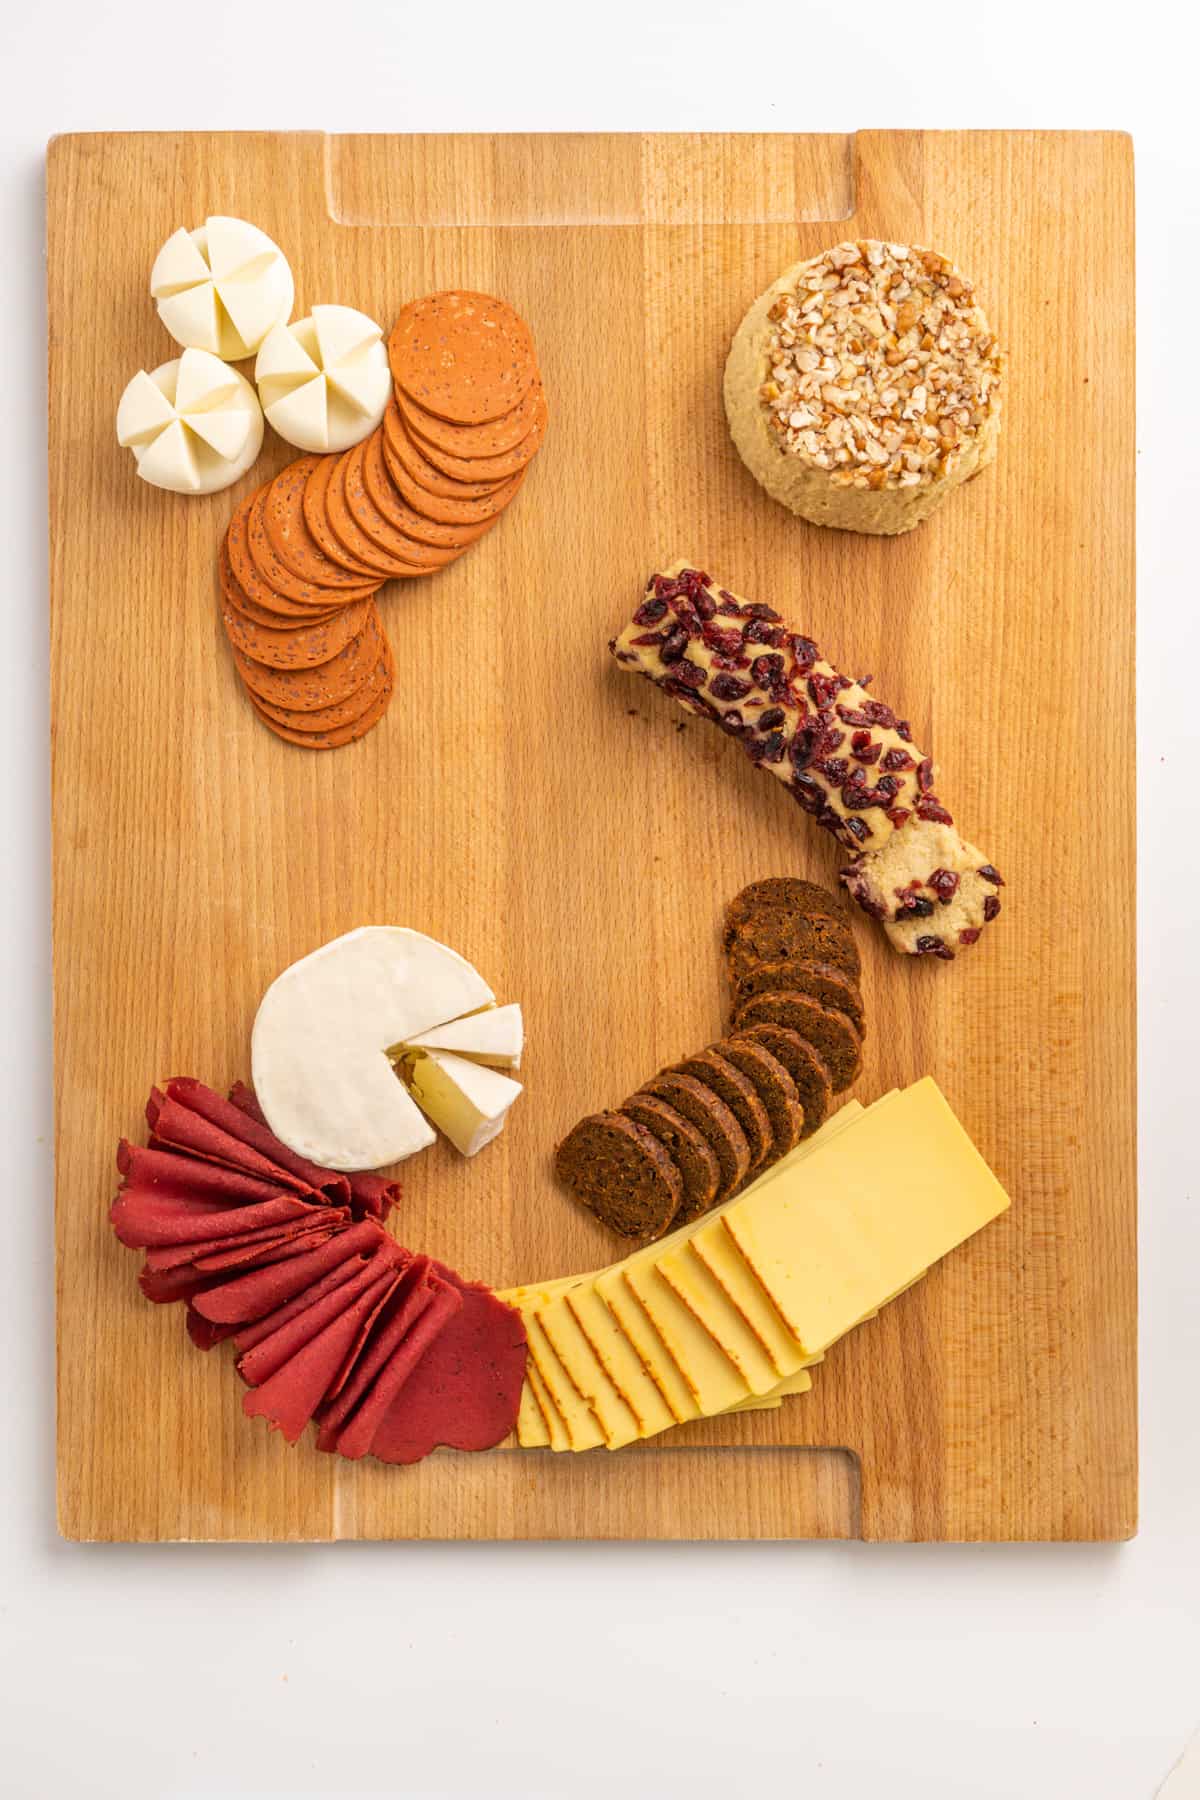 Vegan cheeses and ready-to-eat meat alternatives arranged on a wooden board.